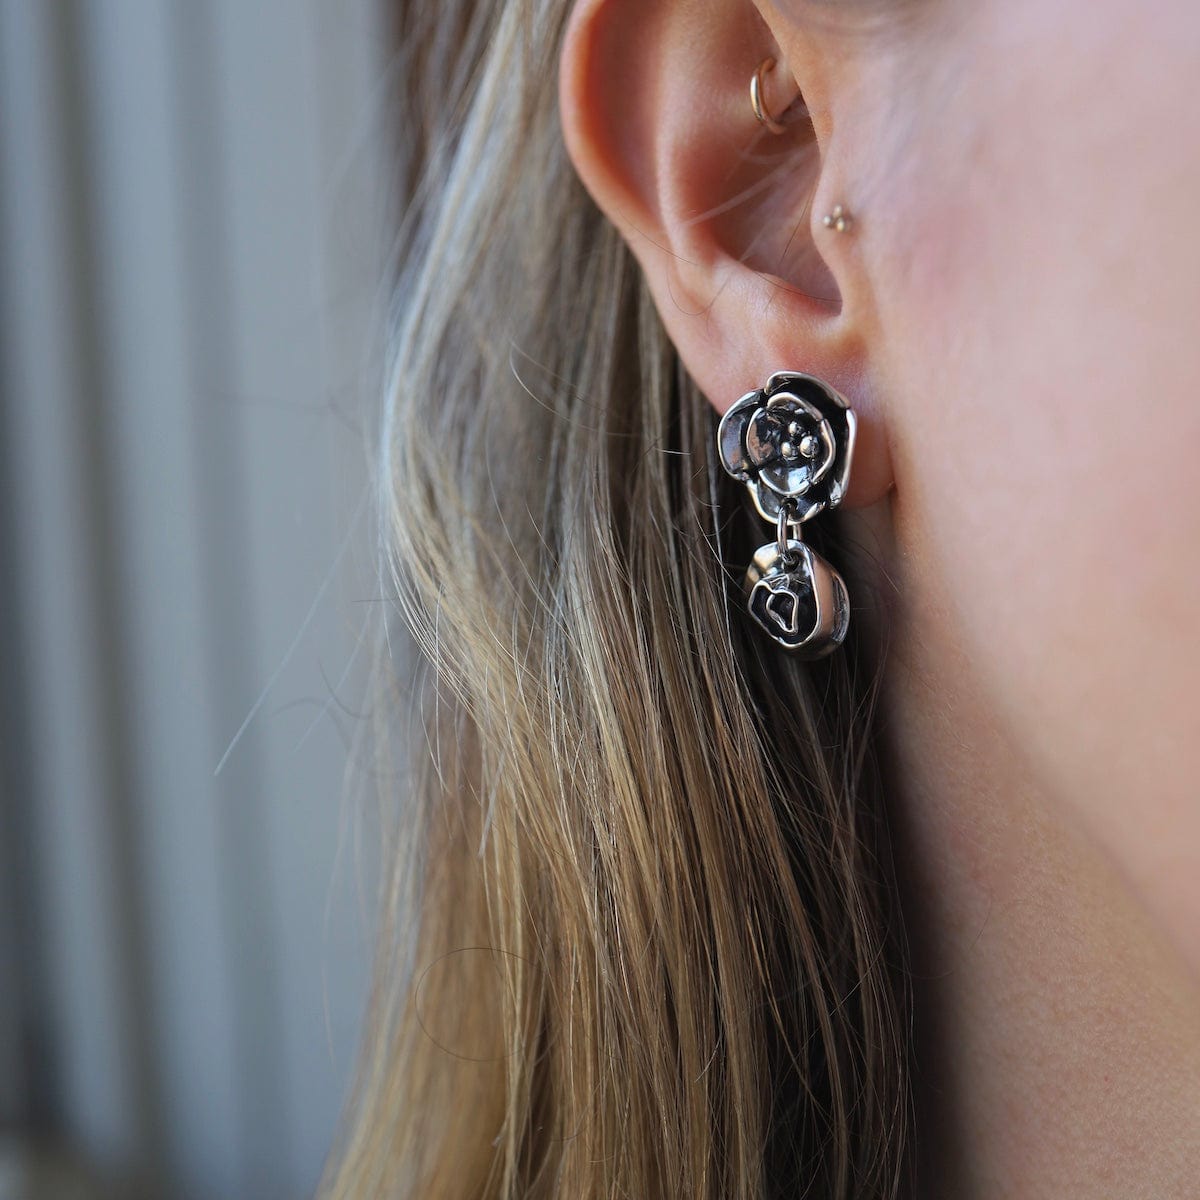 EAR Double Dogwood Post Earrings with Small Rose Drop